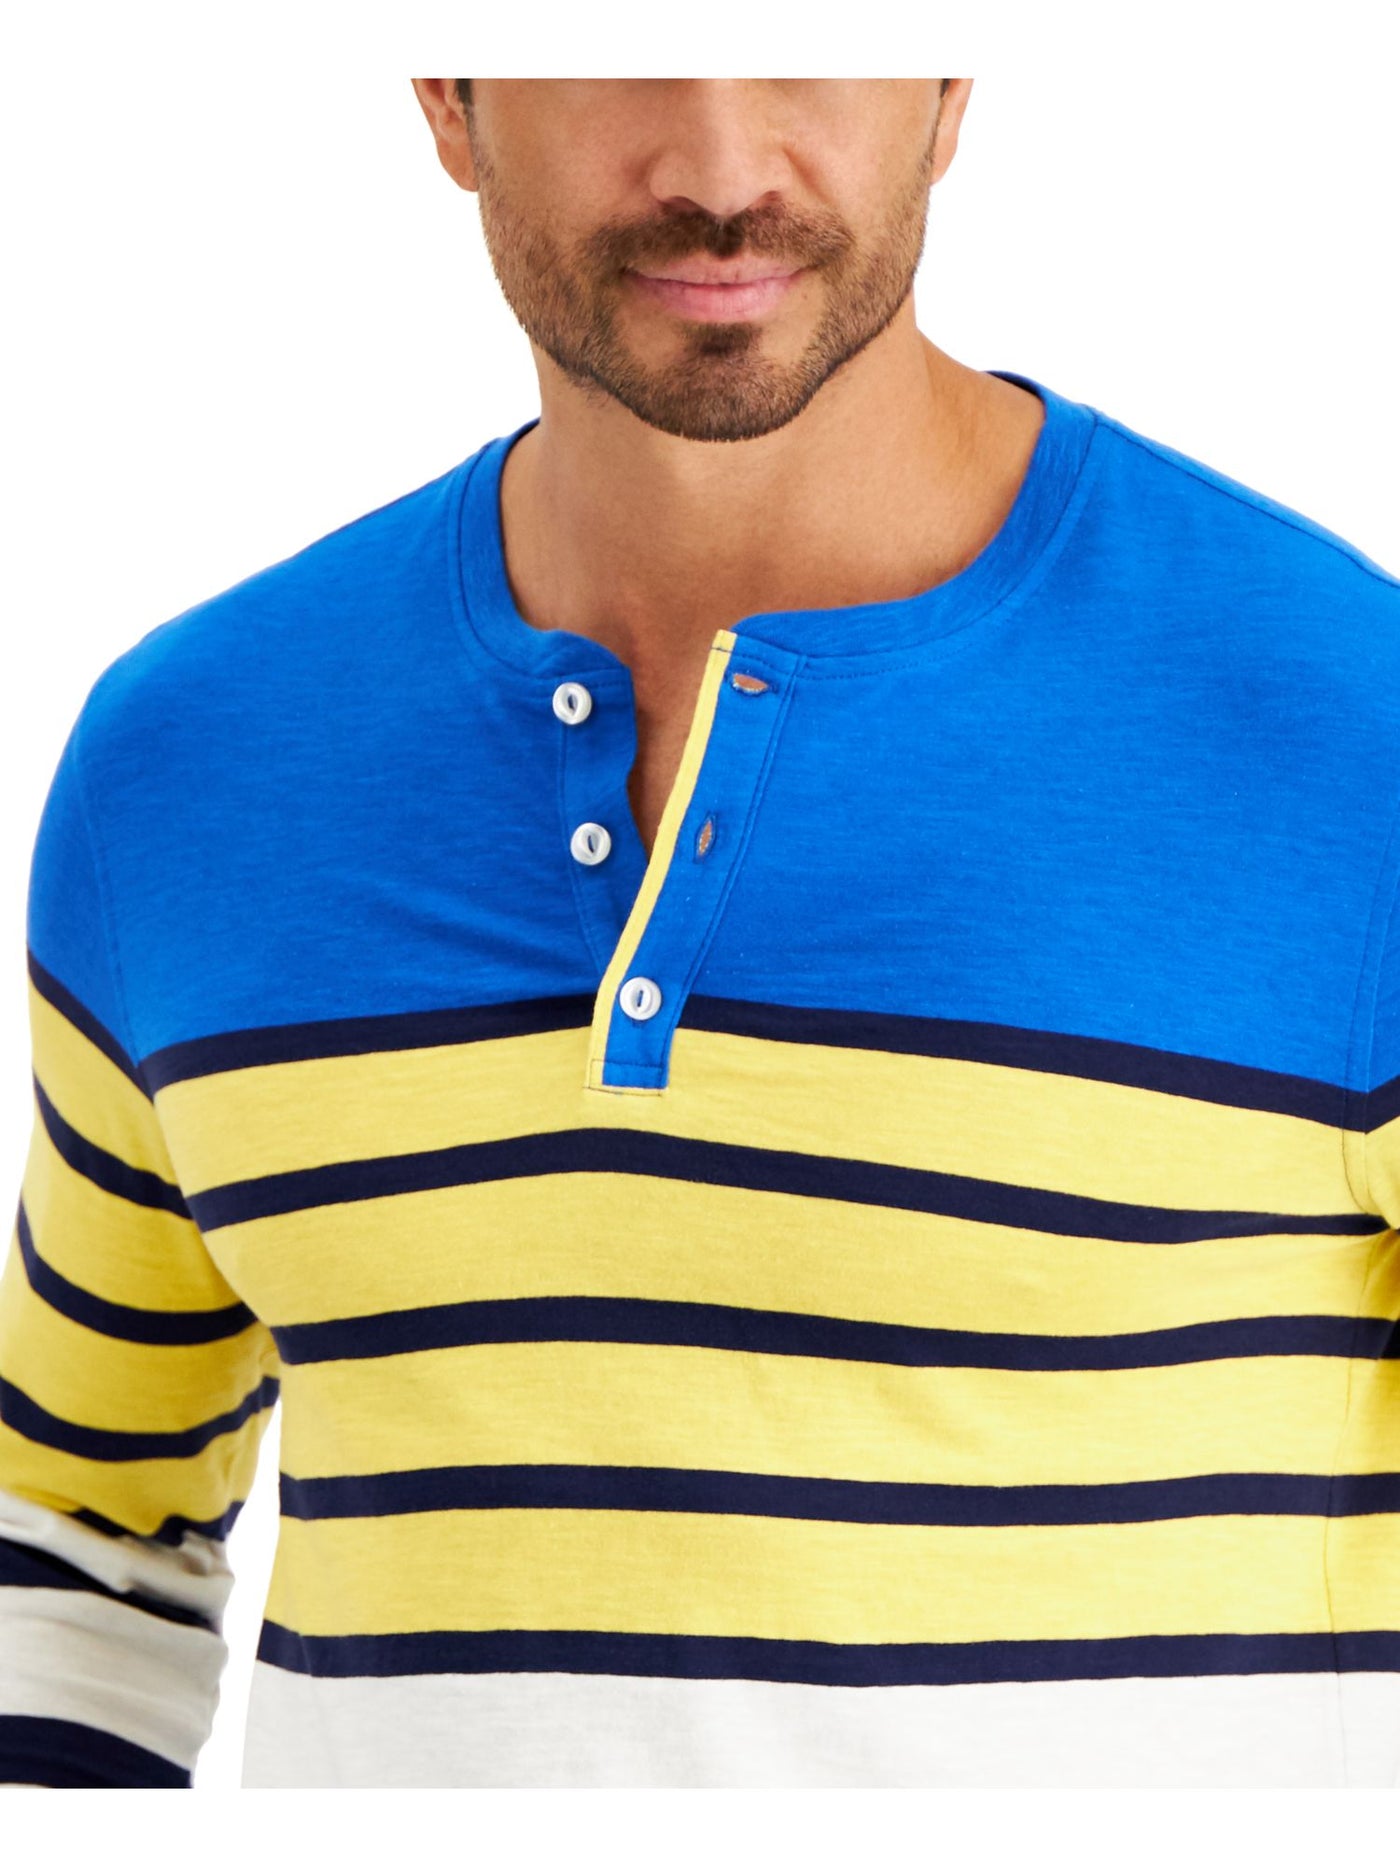 CLUBROOM Mens Blue Striped Classic Fit Henley Shirt M